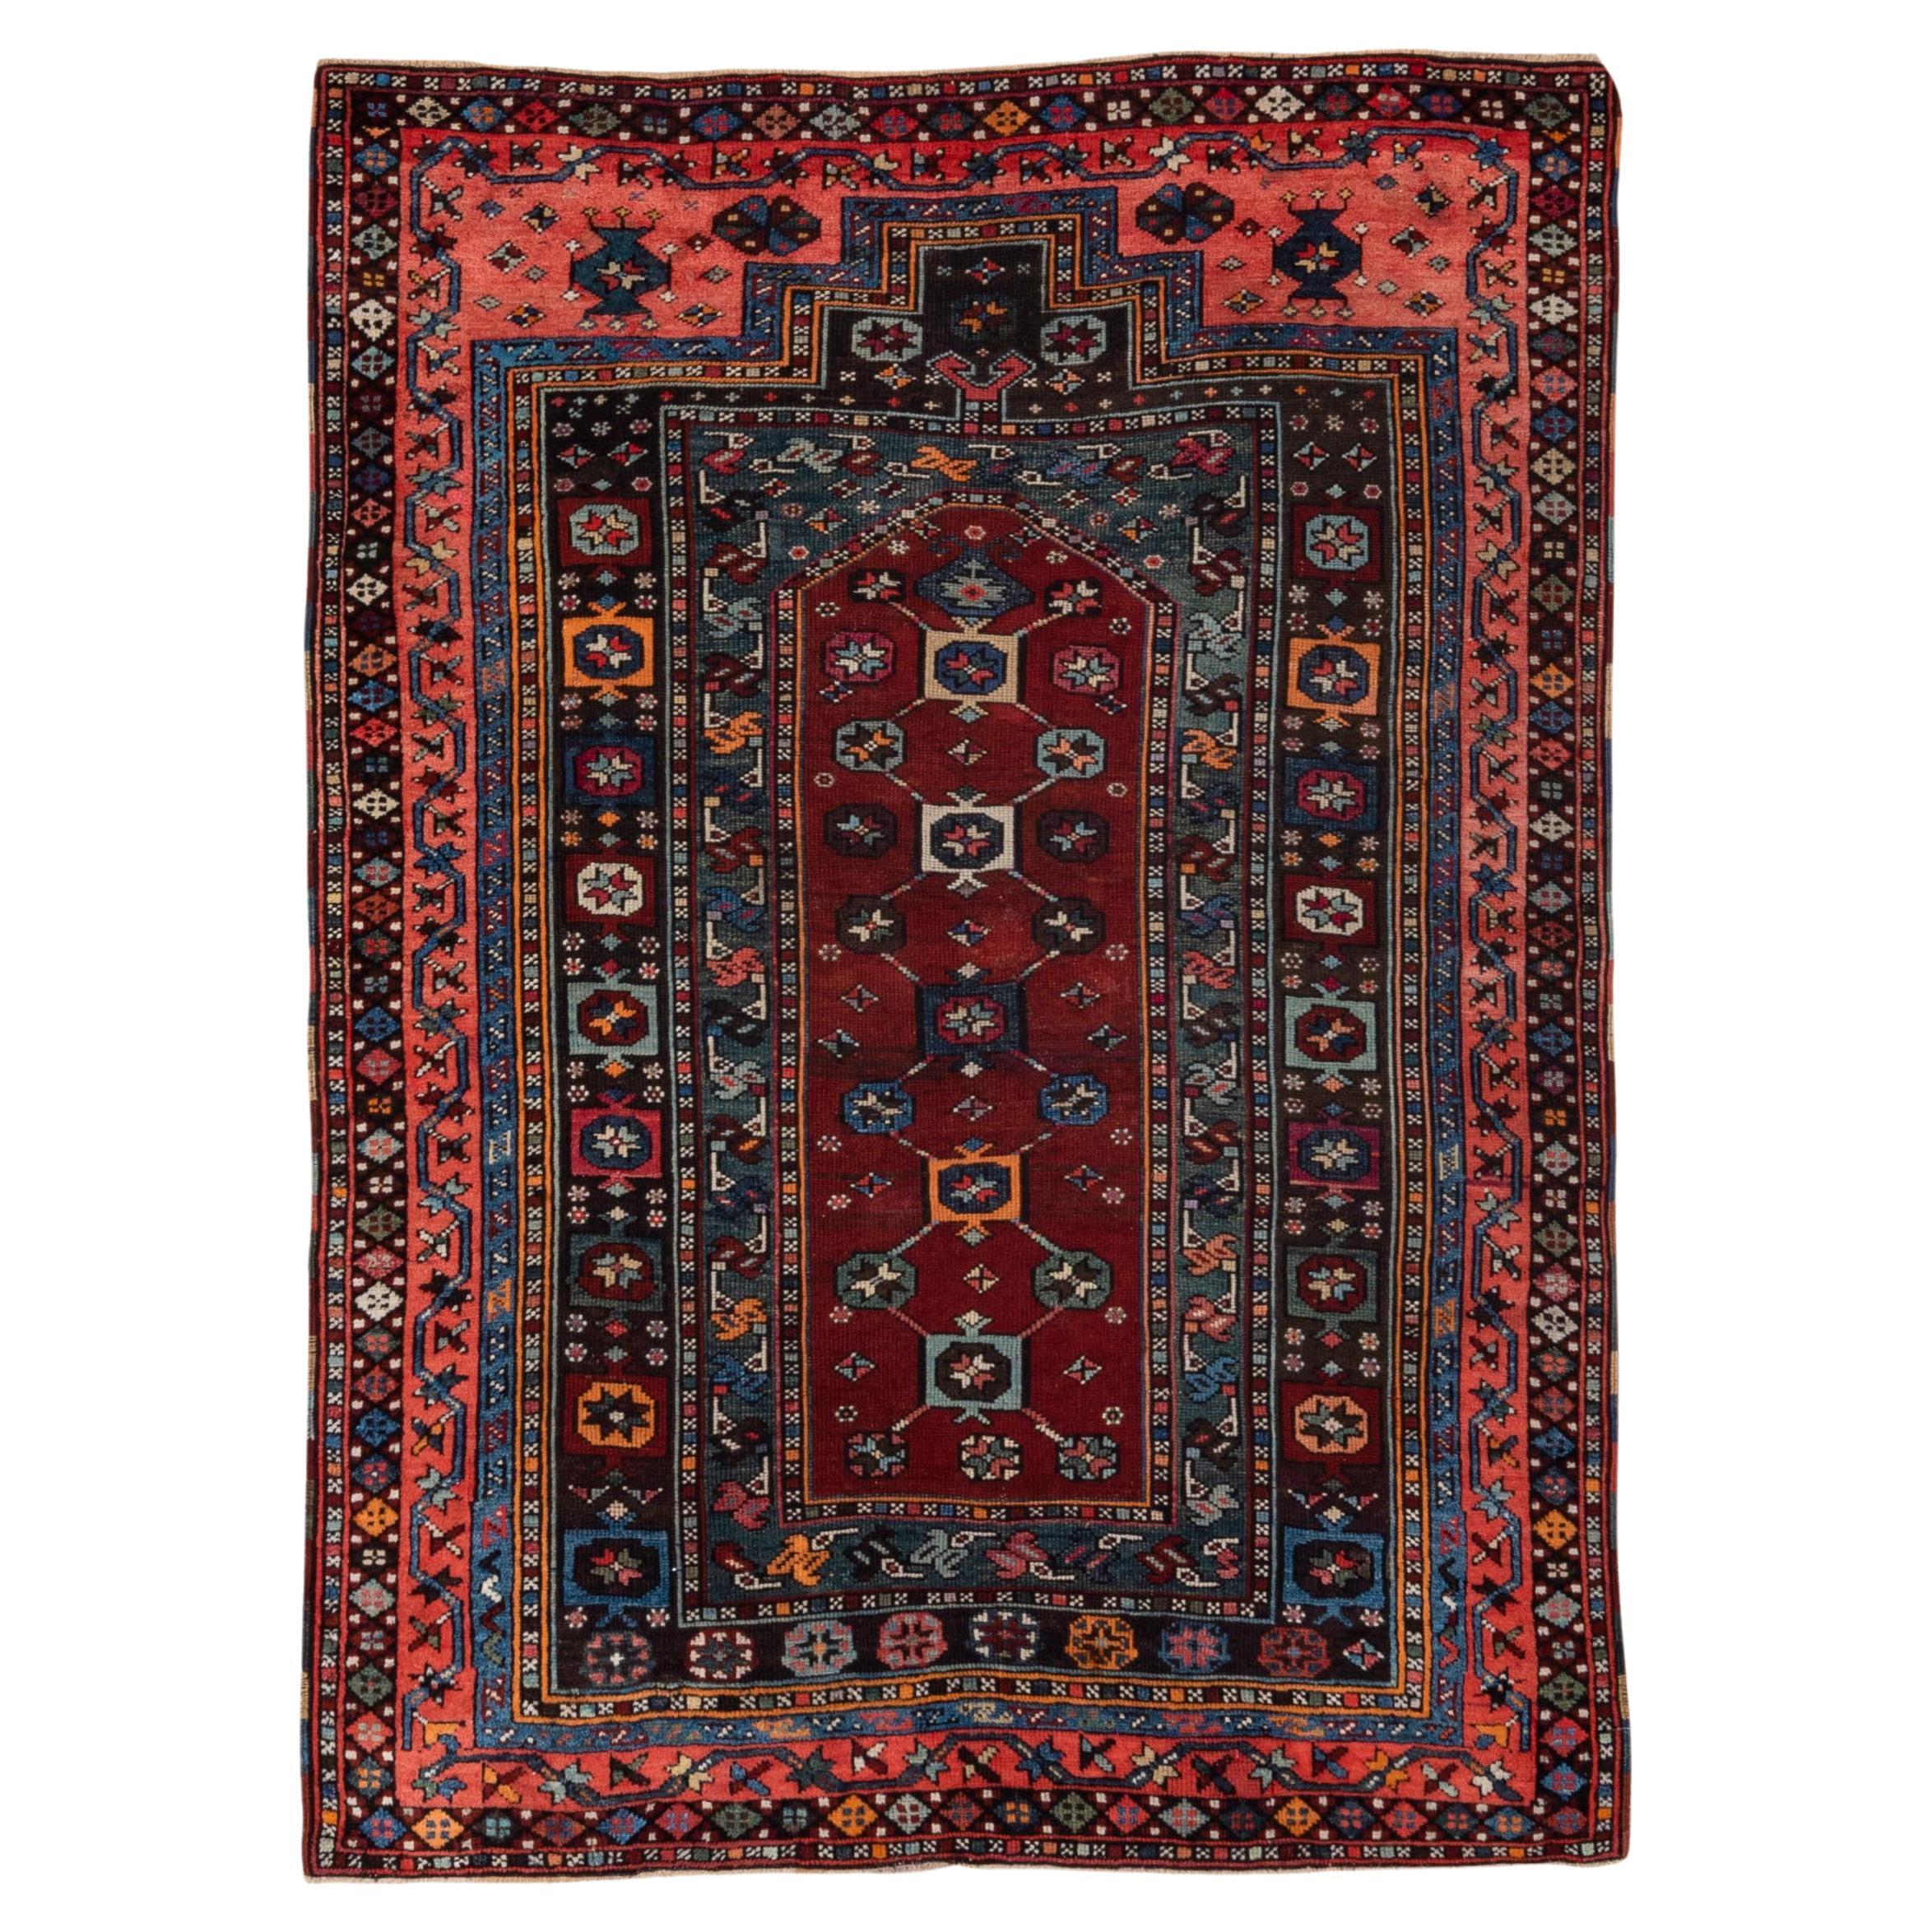 Royal Red and Pink Bubblegum Shirvan City Carpet Cira 1920 For Sale